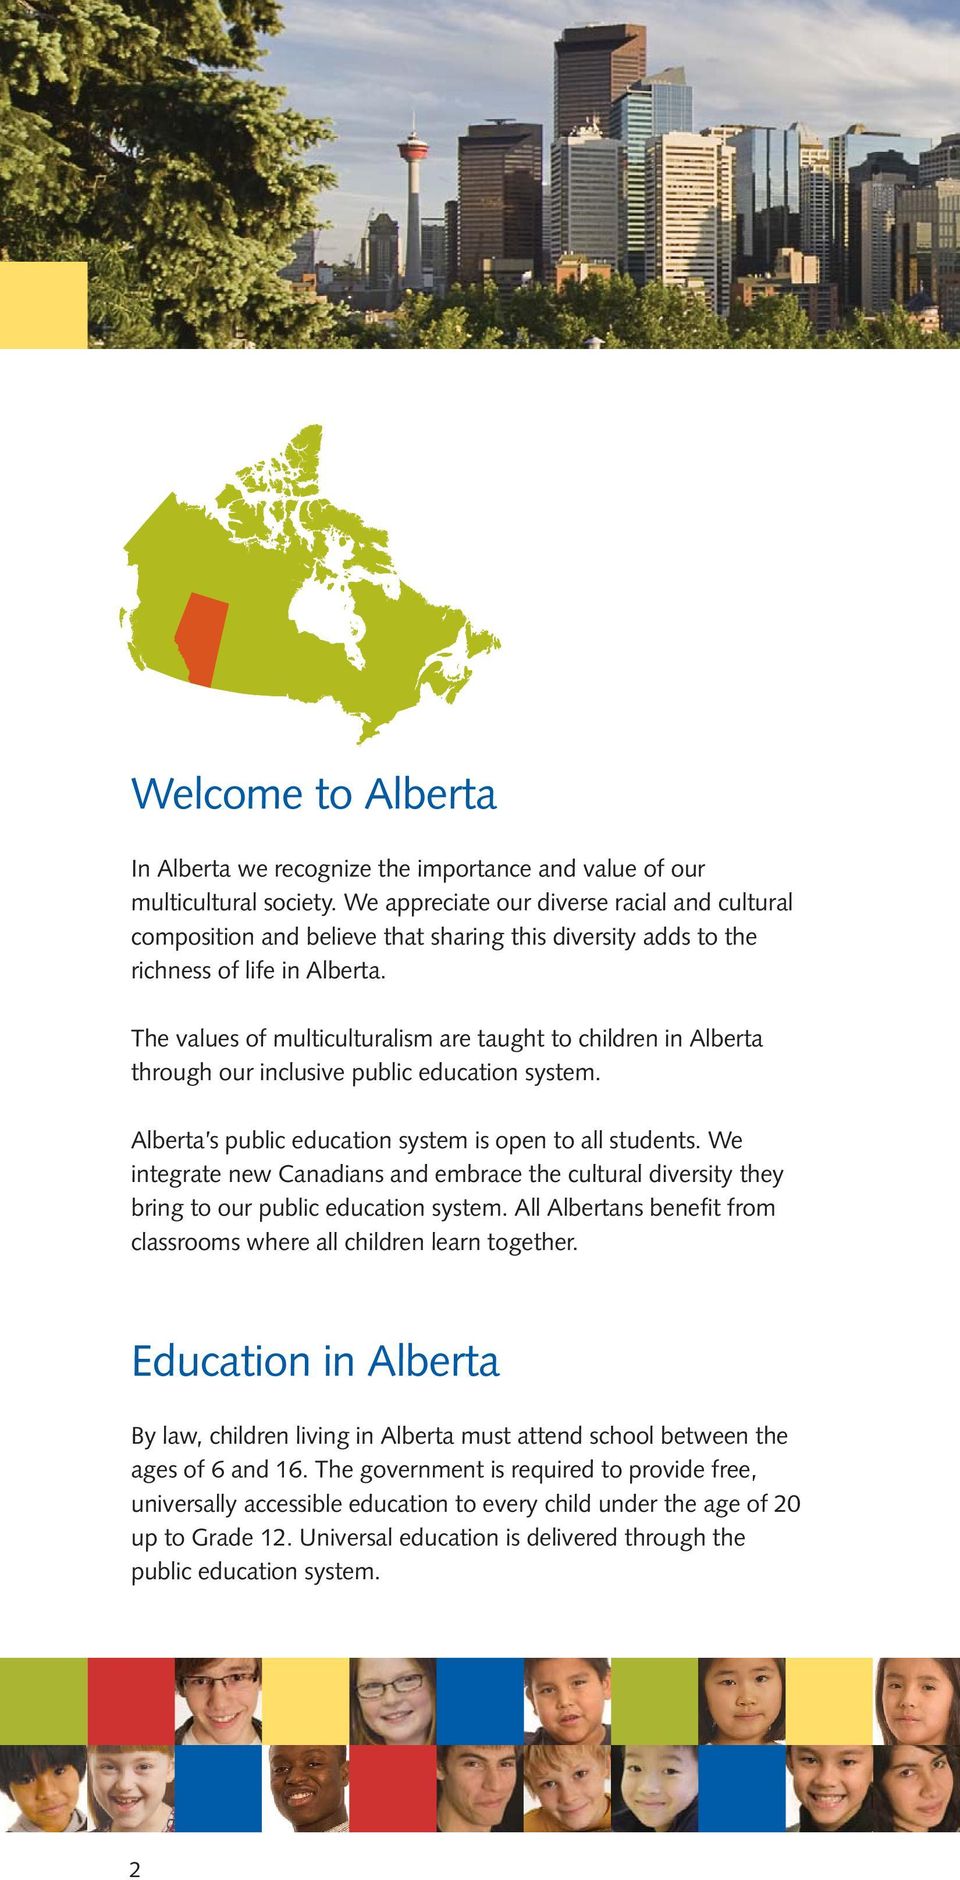 The values of multiculturalism are taught to children in Alberta through our inclusive public education system. Alberta s public education system is open to all students.